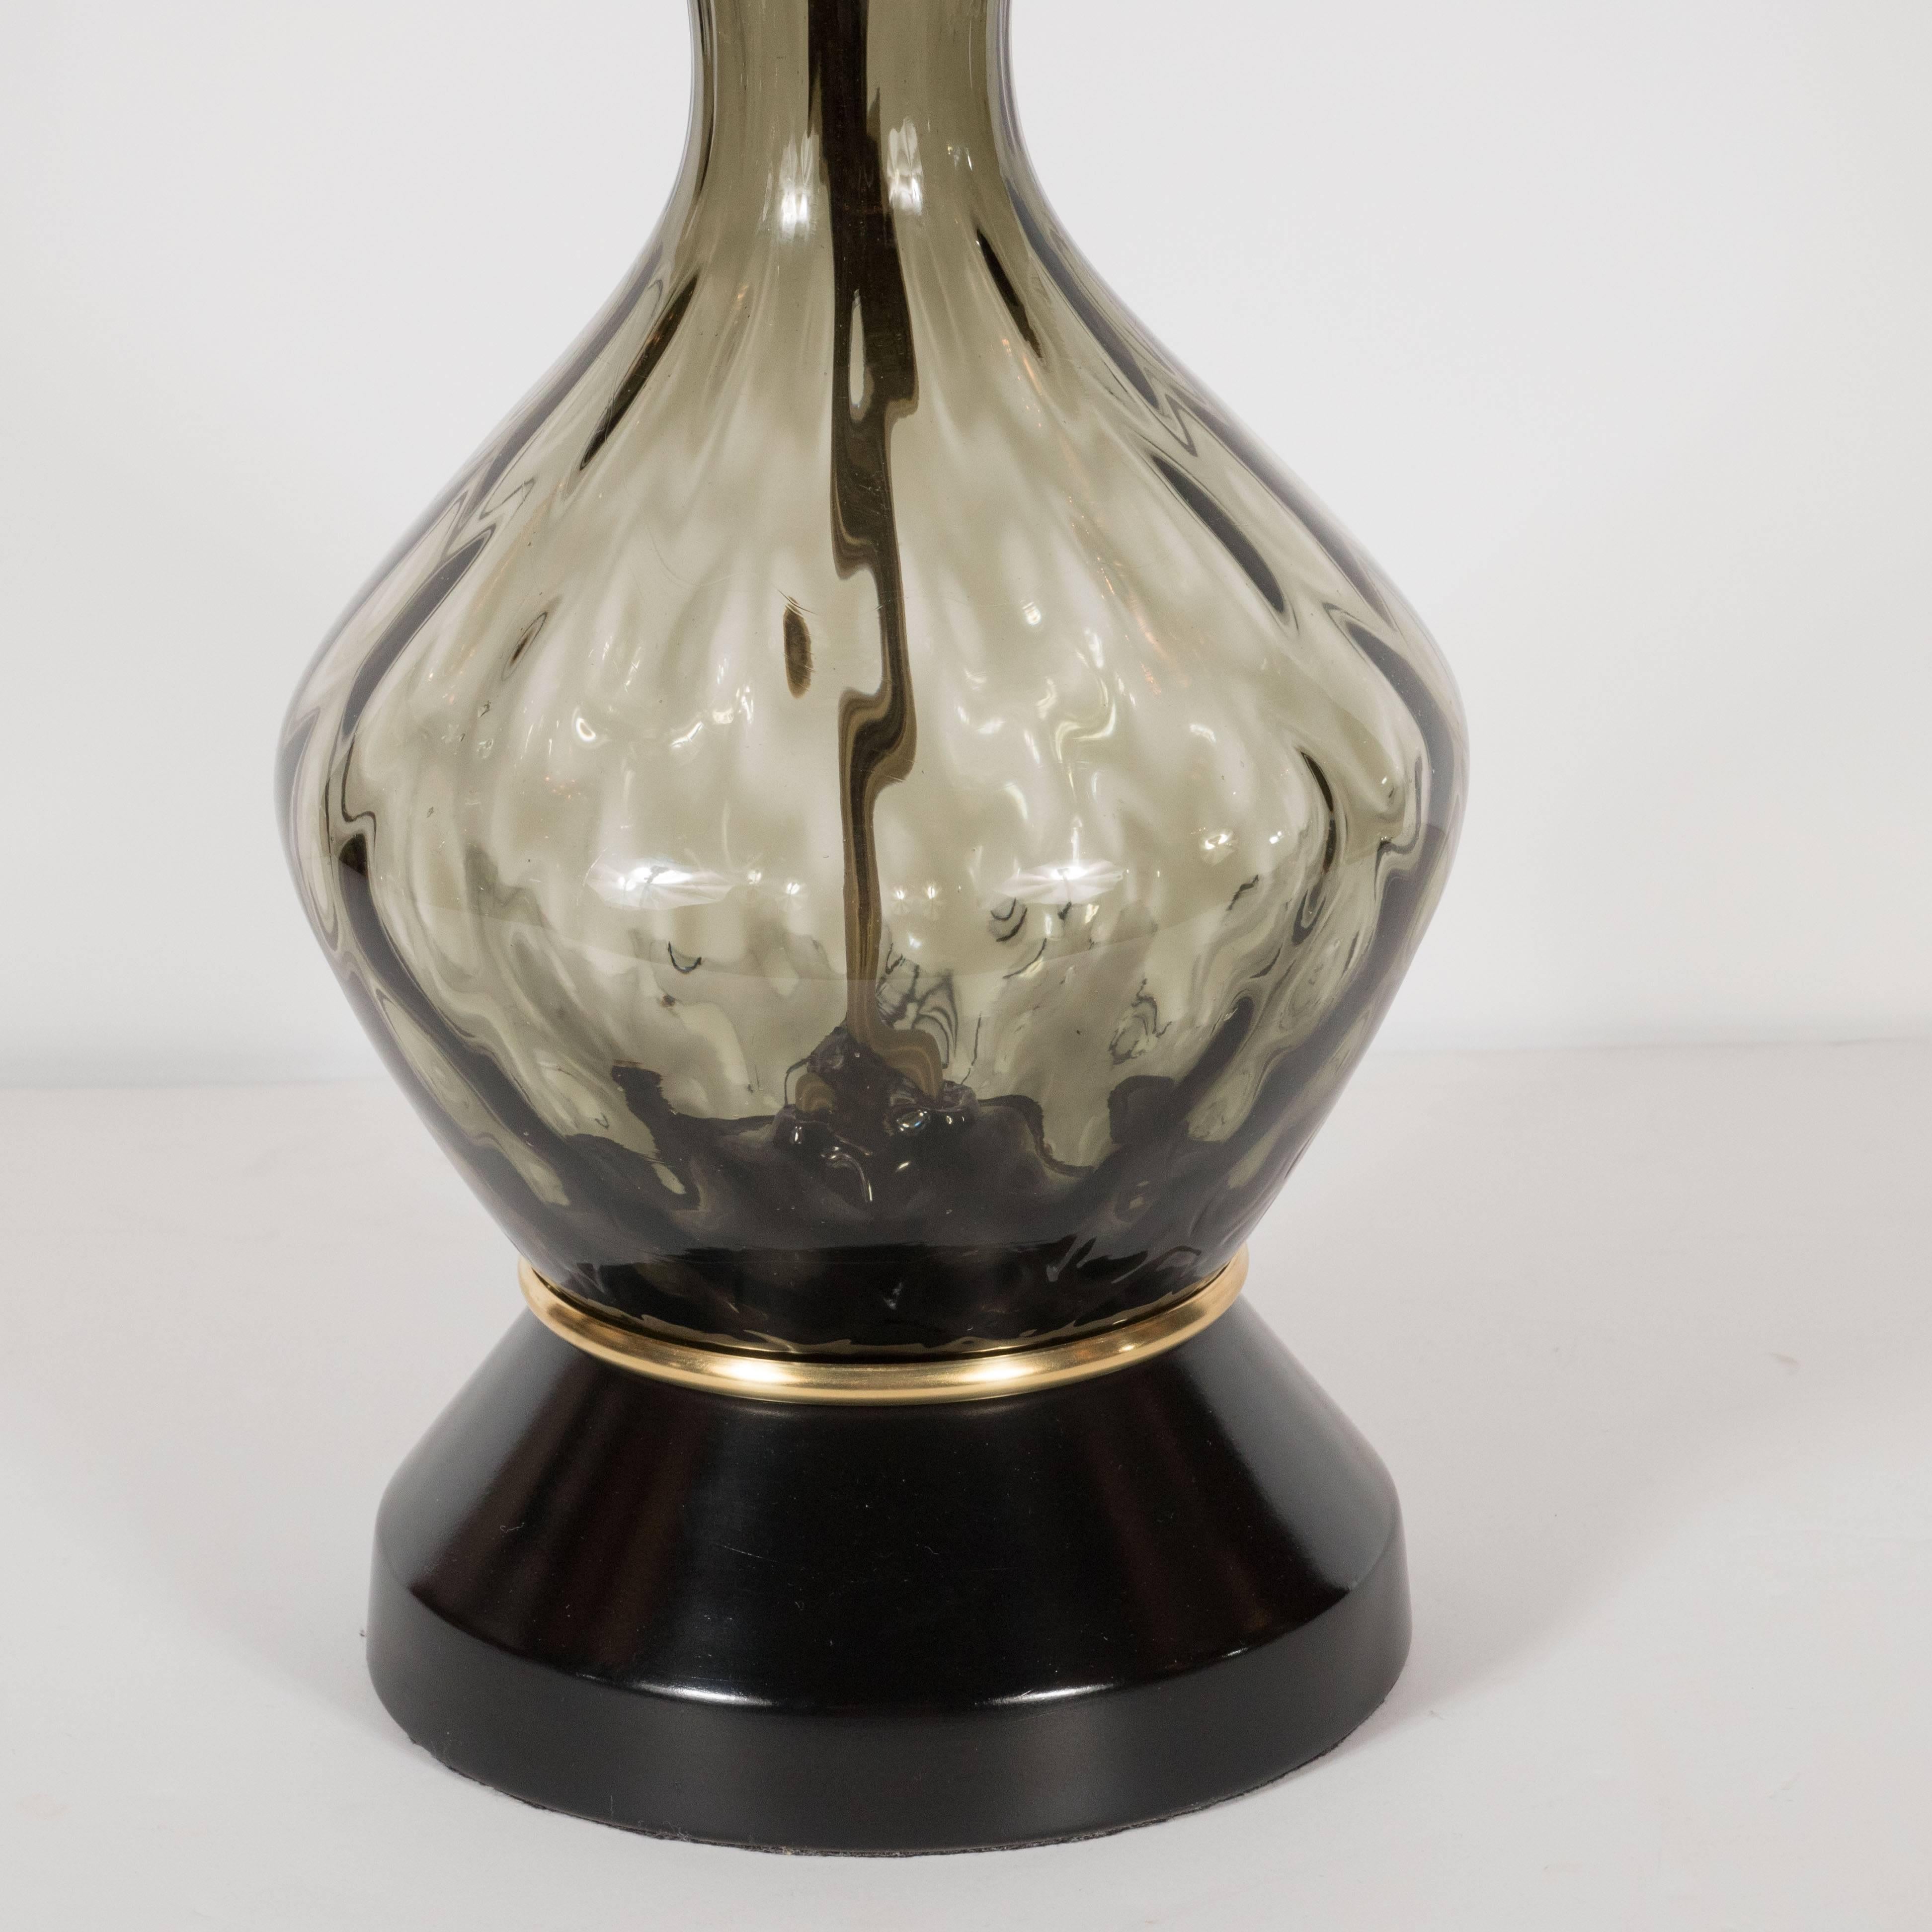 This sophisticated pair of Mid-Century Modern handblown table lamps were realized in Murano, Italy- the Venetian island renowned for producing some of the highest quality glass for centuries, circa 1960. These pieces feature round black enamel bases